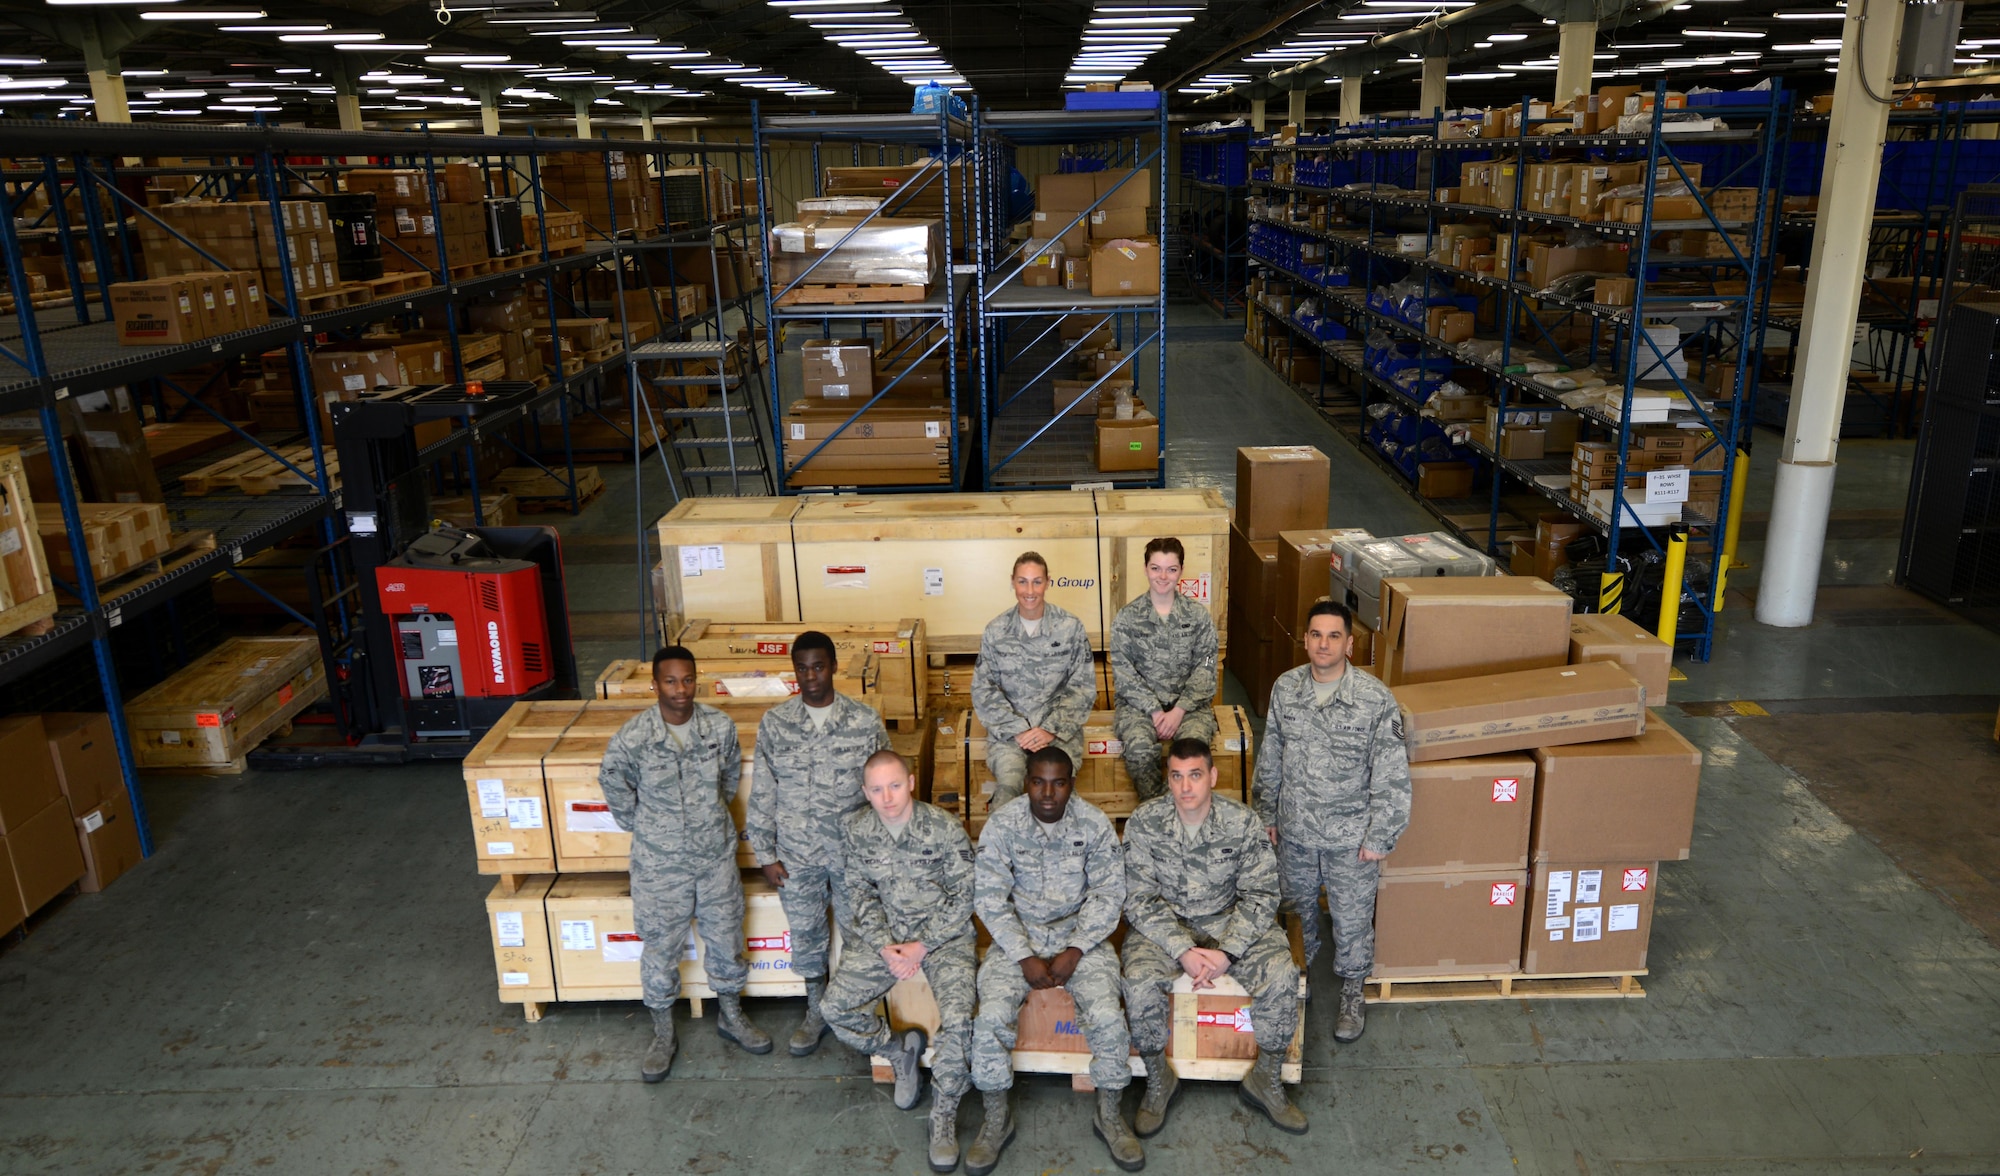 The 56th Logistics Readiness Squadron central storage section was nominated   for the Air Education Training Command Department of Defense Award for Supply Chain Excellence Jan. 25, 2017, at Luke Air Force Base, Ariz. The 56th LRS received the award due to their excellence in providing supply support to the Air Force’s largest fighter wing. (U.S. Air Force photo by Airman 1st Class Alexander Cook)